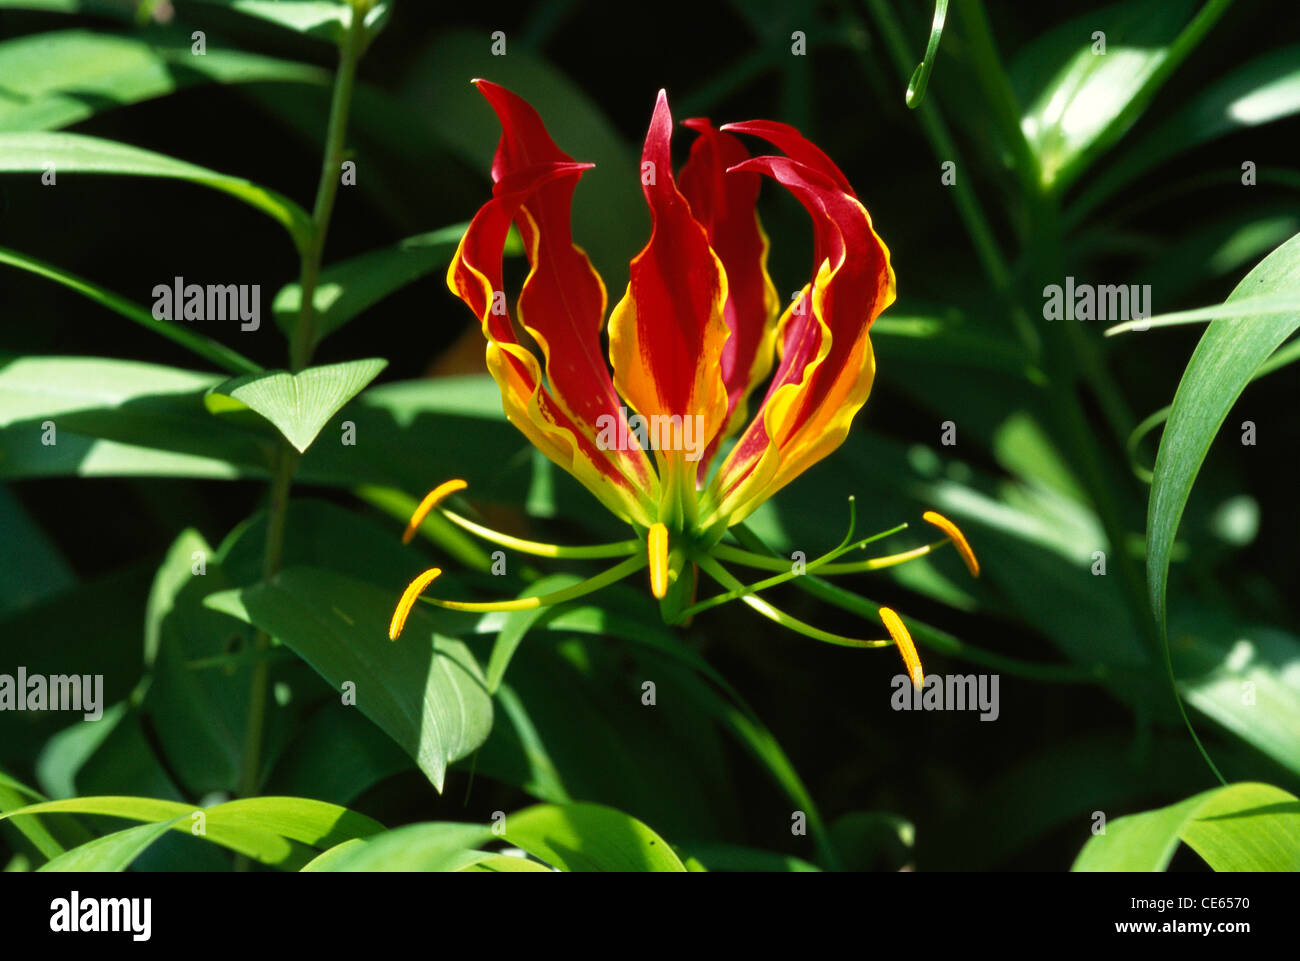 Glory Lily ; flame lily, fire lily, gloriosa lily, superb lily, climbing lily, creeping lily, Gloriosa superba plant ; flower ; India ; Asia Stock Photo